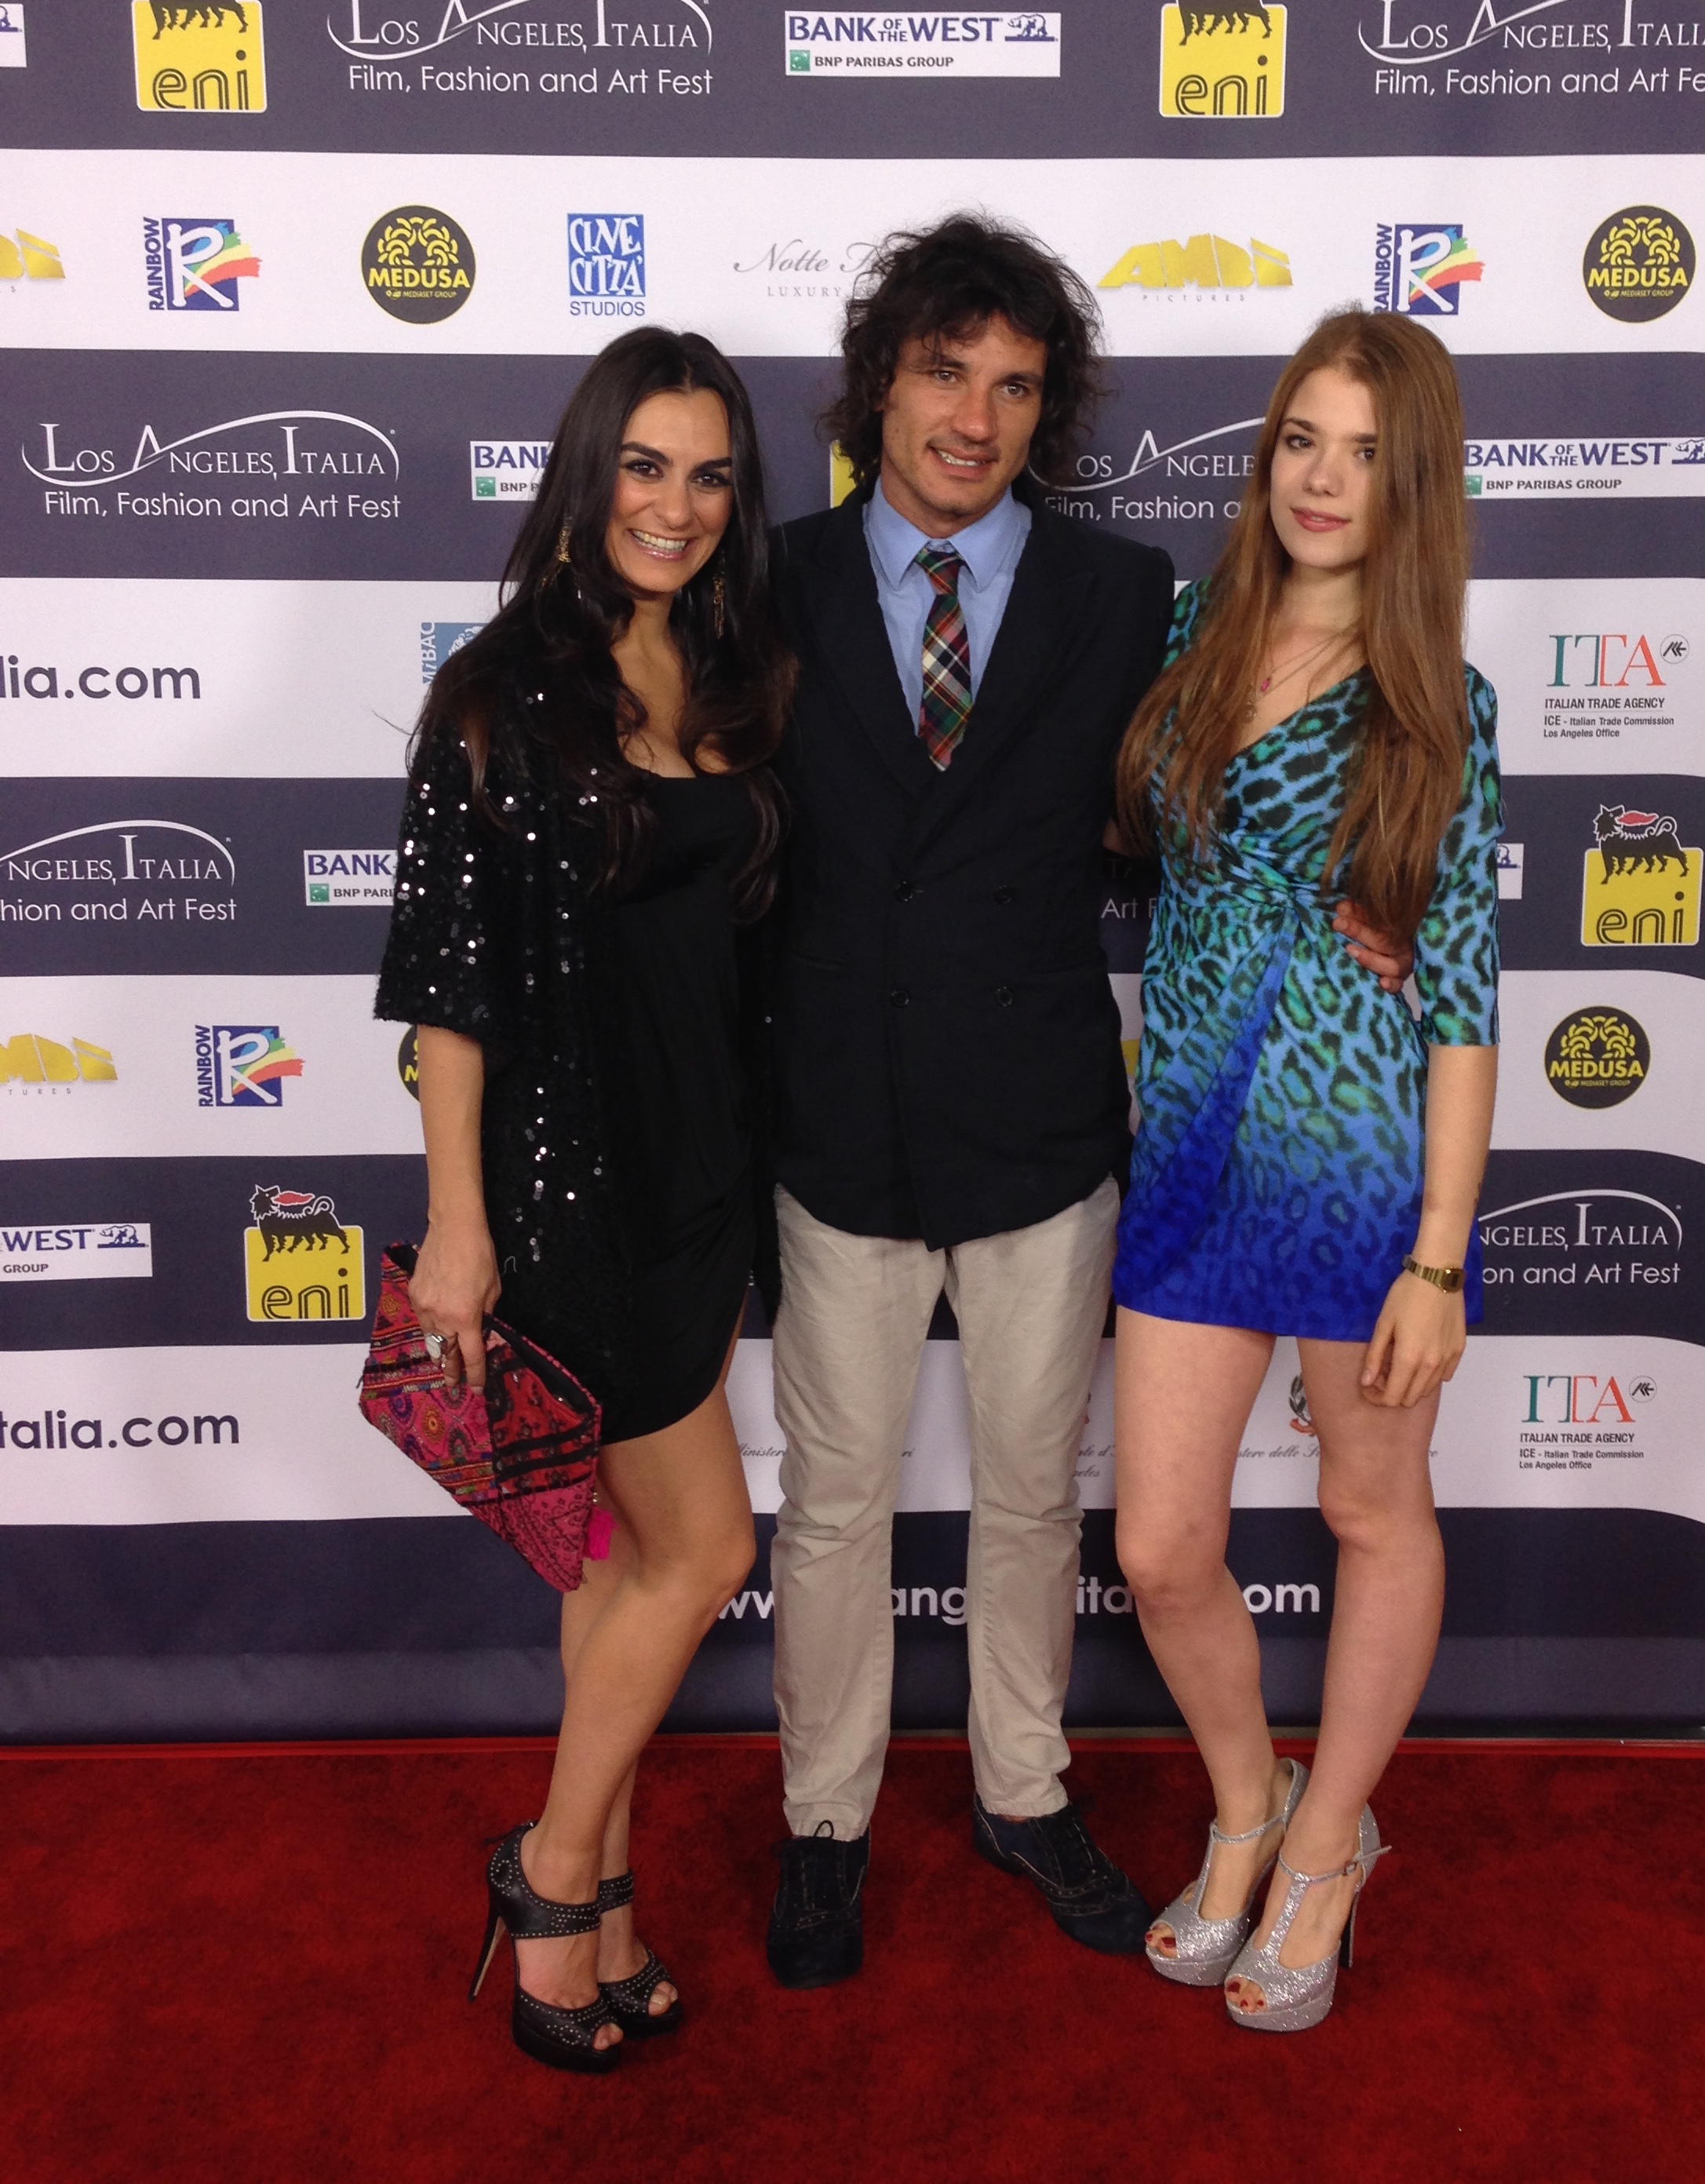 Christine Uhebe, Giuseppe Schillaci, Zoe Welsch on Red Carpet at Los Angeles - Italia Film, fashion and Art Fest (2013)